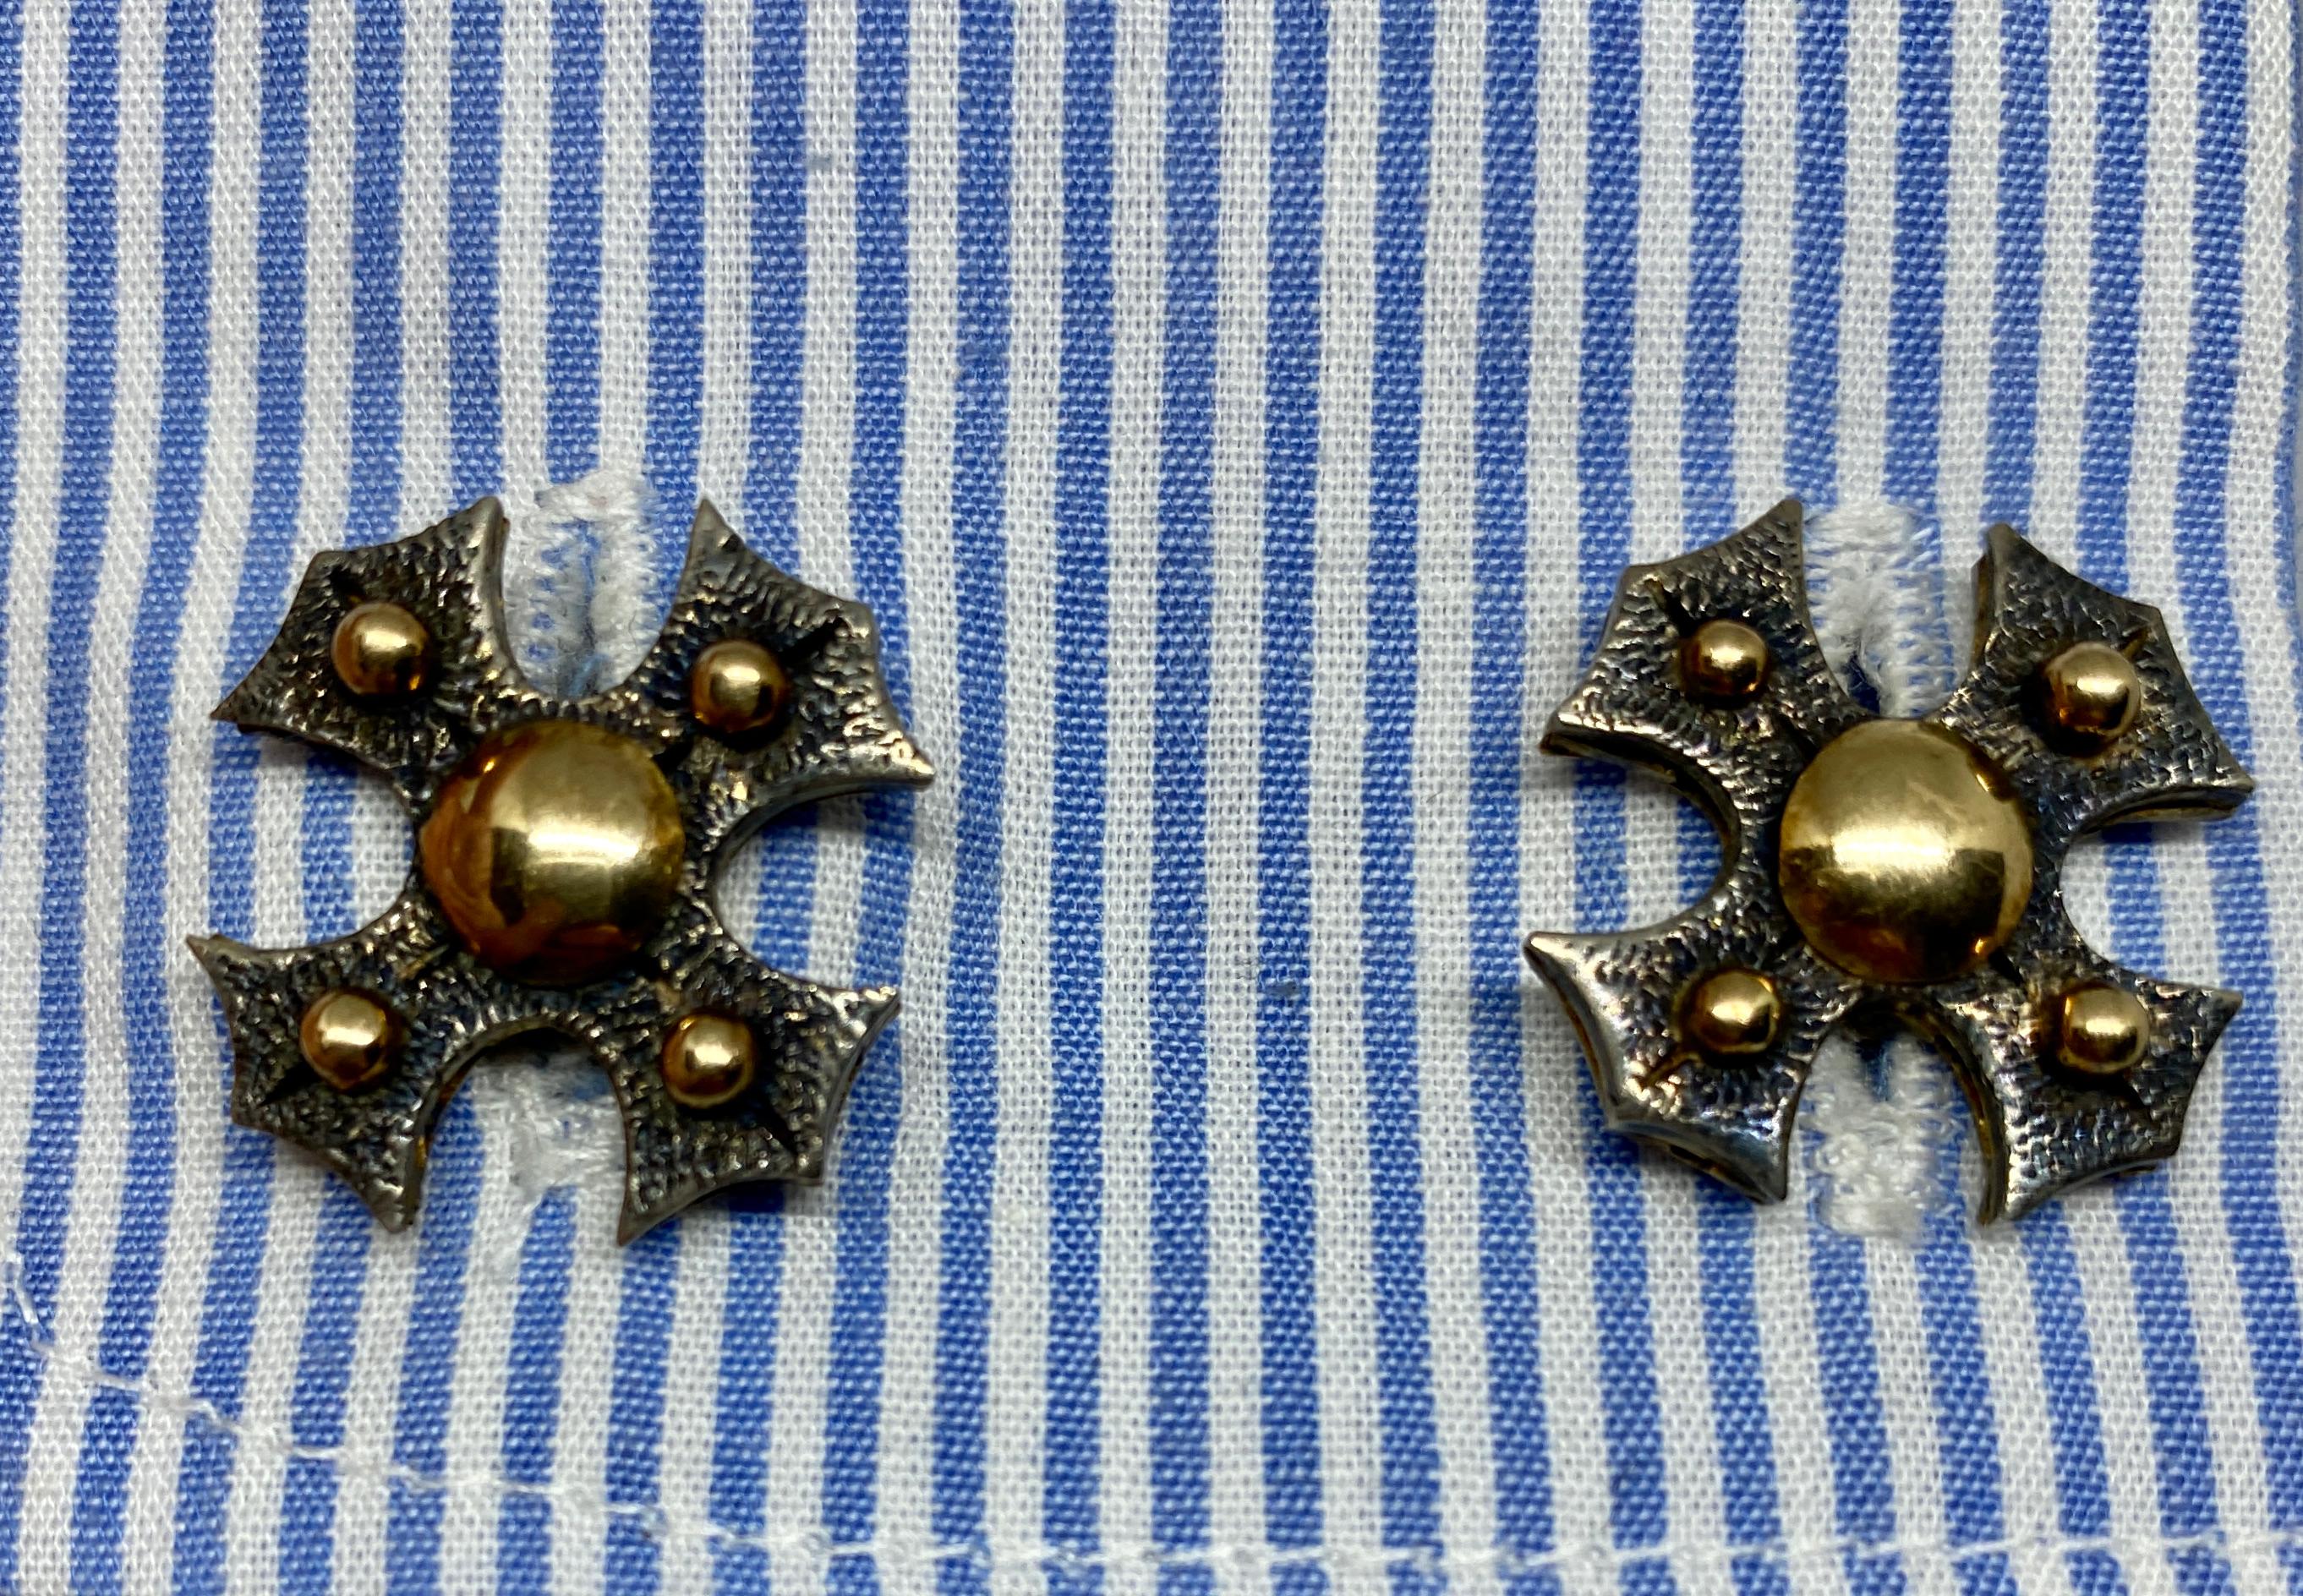 Women's or Men's Handmade Cufflinks in 18k Gold with Hammered Silver Details by Ranfagni Firenze For Sale